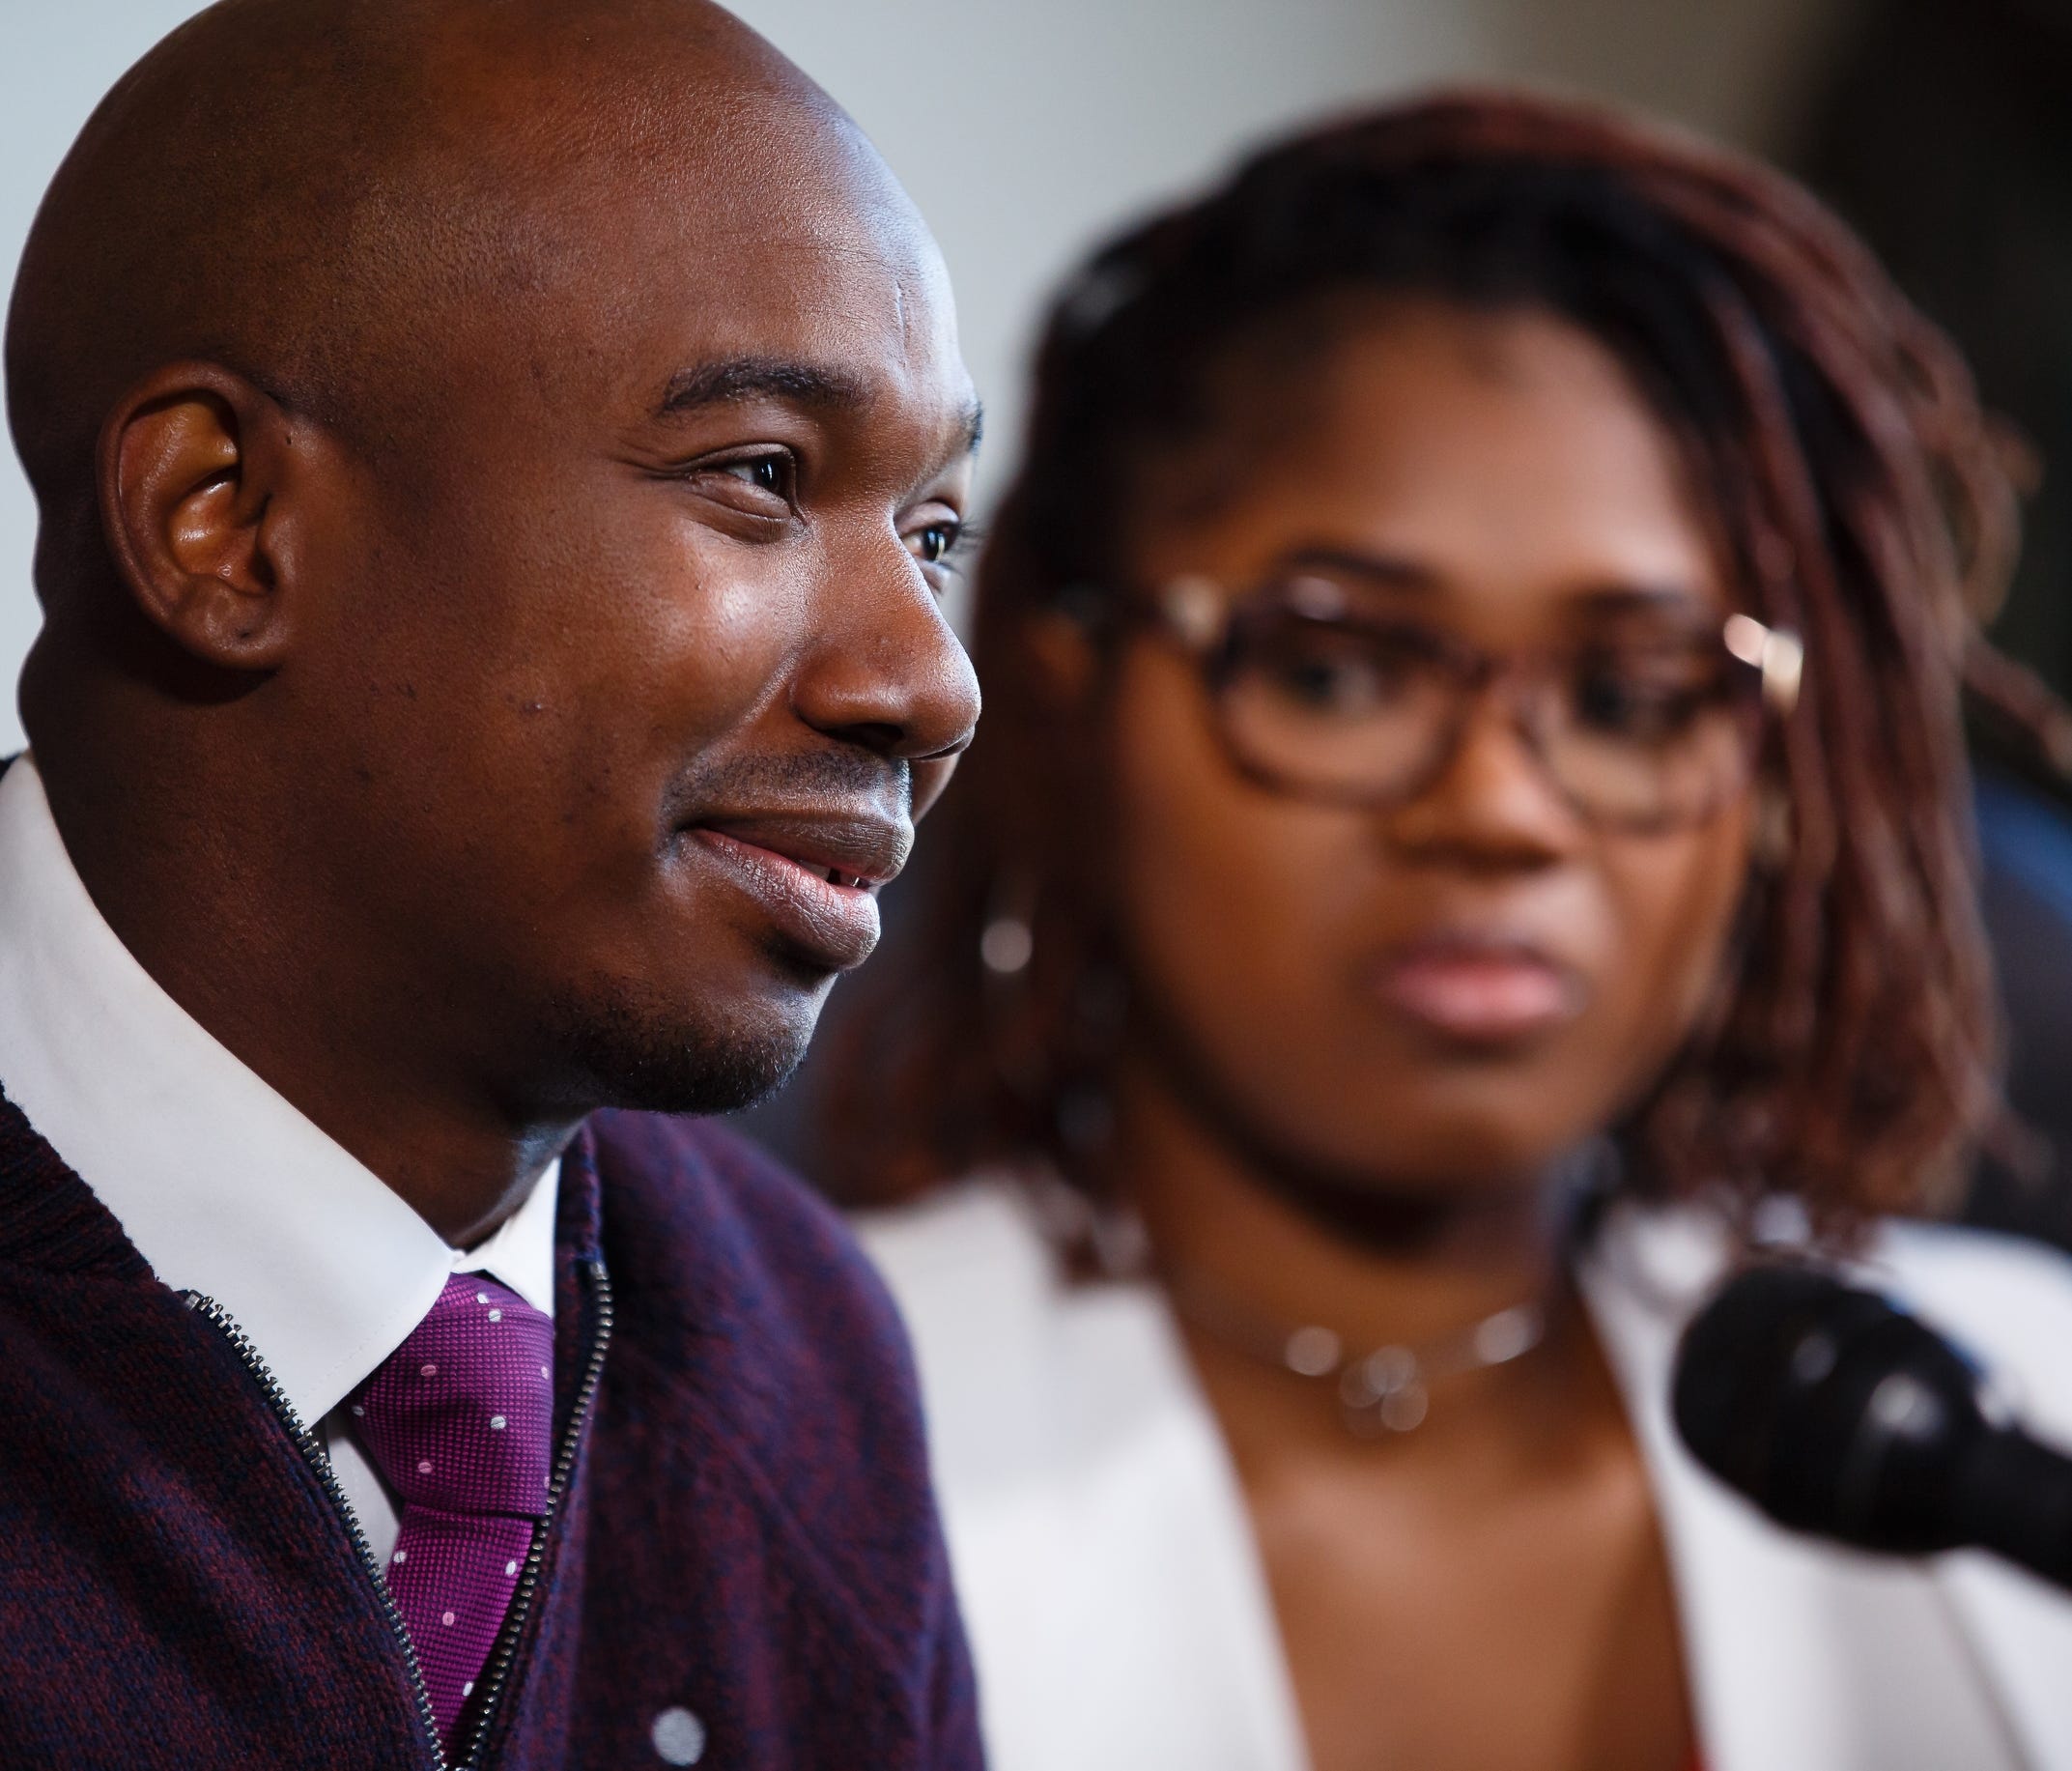 James Conley III, center, whose Facebook post of a racial profiling incident at the Old Navy store in West Des Moines went viral, speaks to the media with his wife to his left and Betty C. Andrews, President, Iowa-Nebraska NAACP State Area Conference